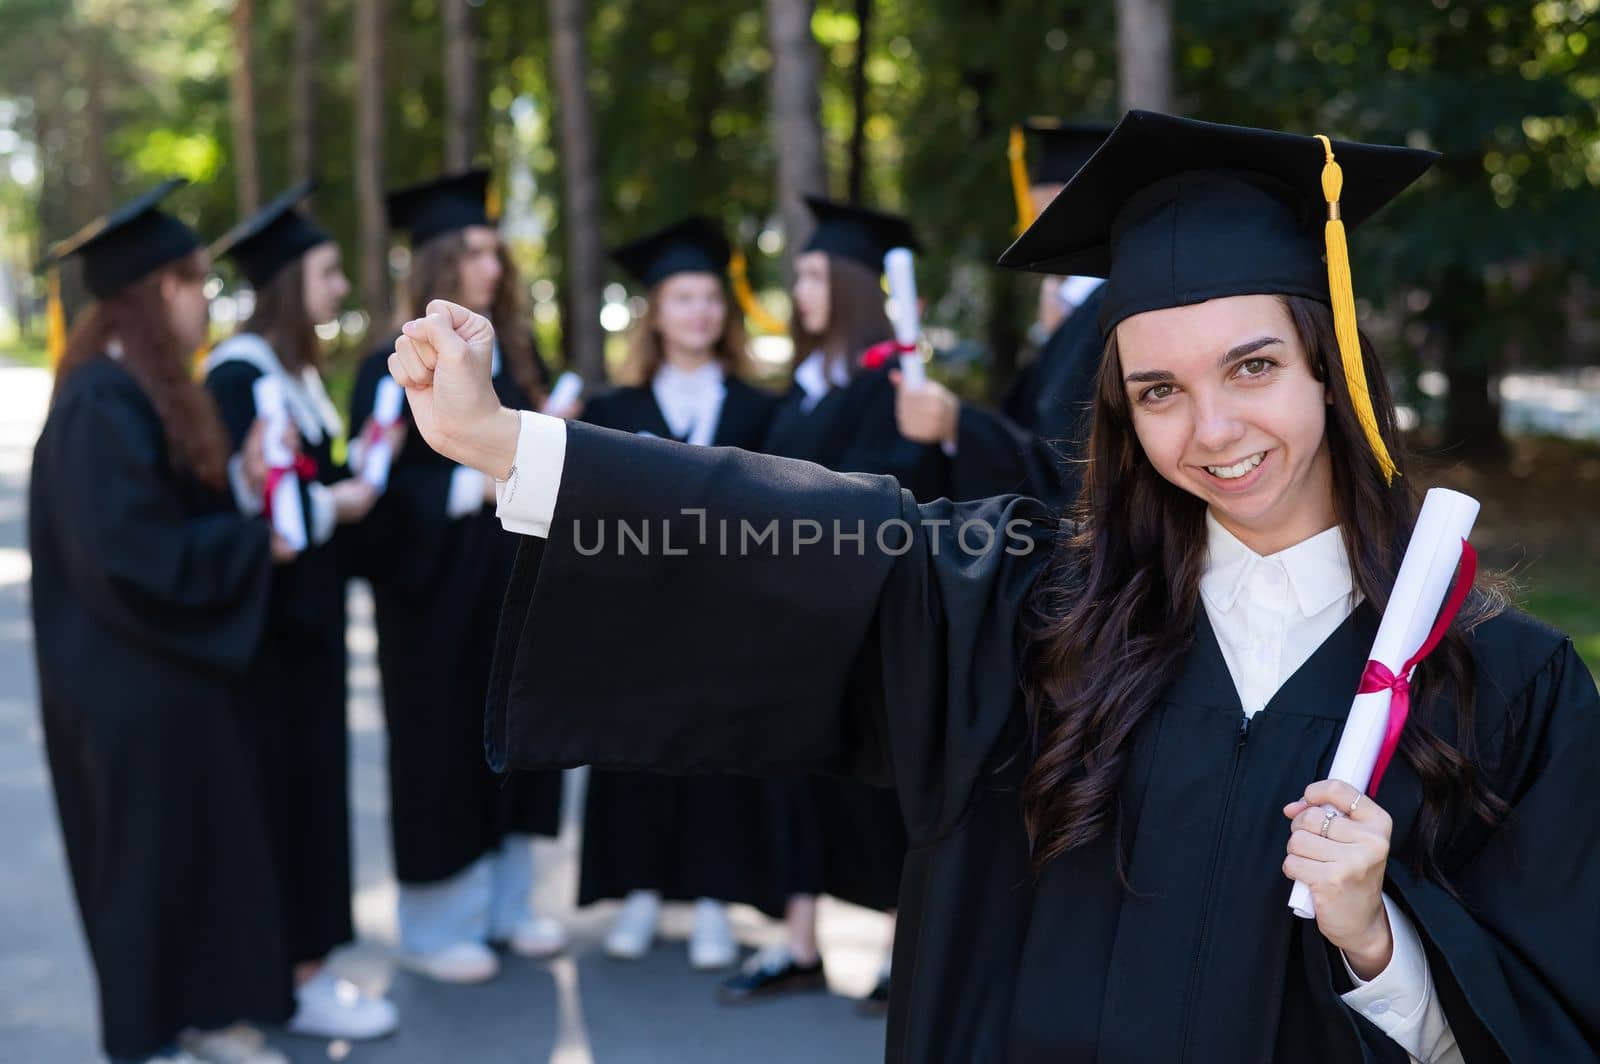 Group of happy students in graduation gowns outdoors. A young girl with a diploma in her hands in the foreground. by mrwed54